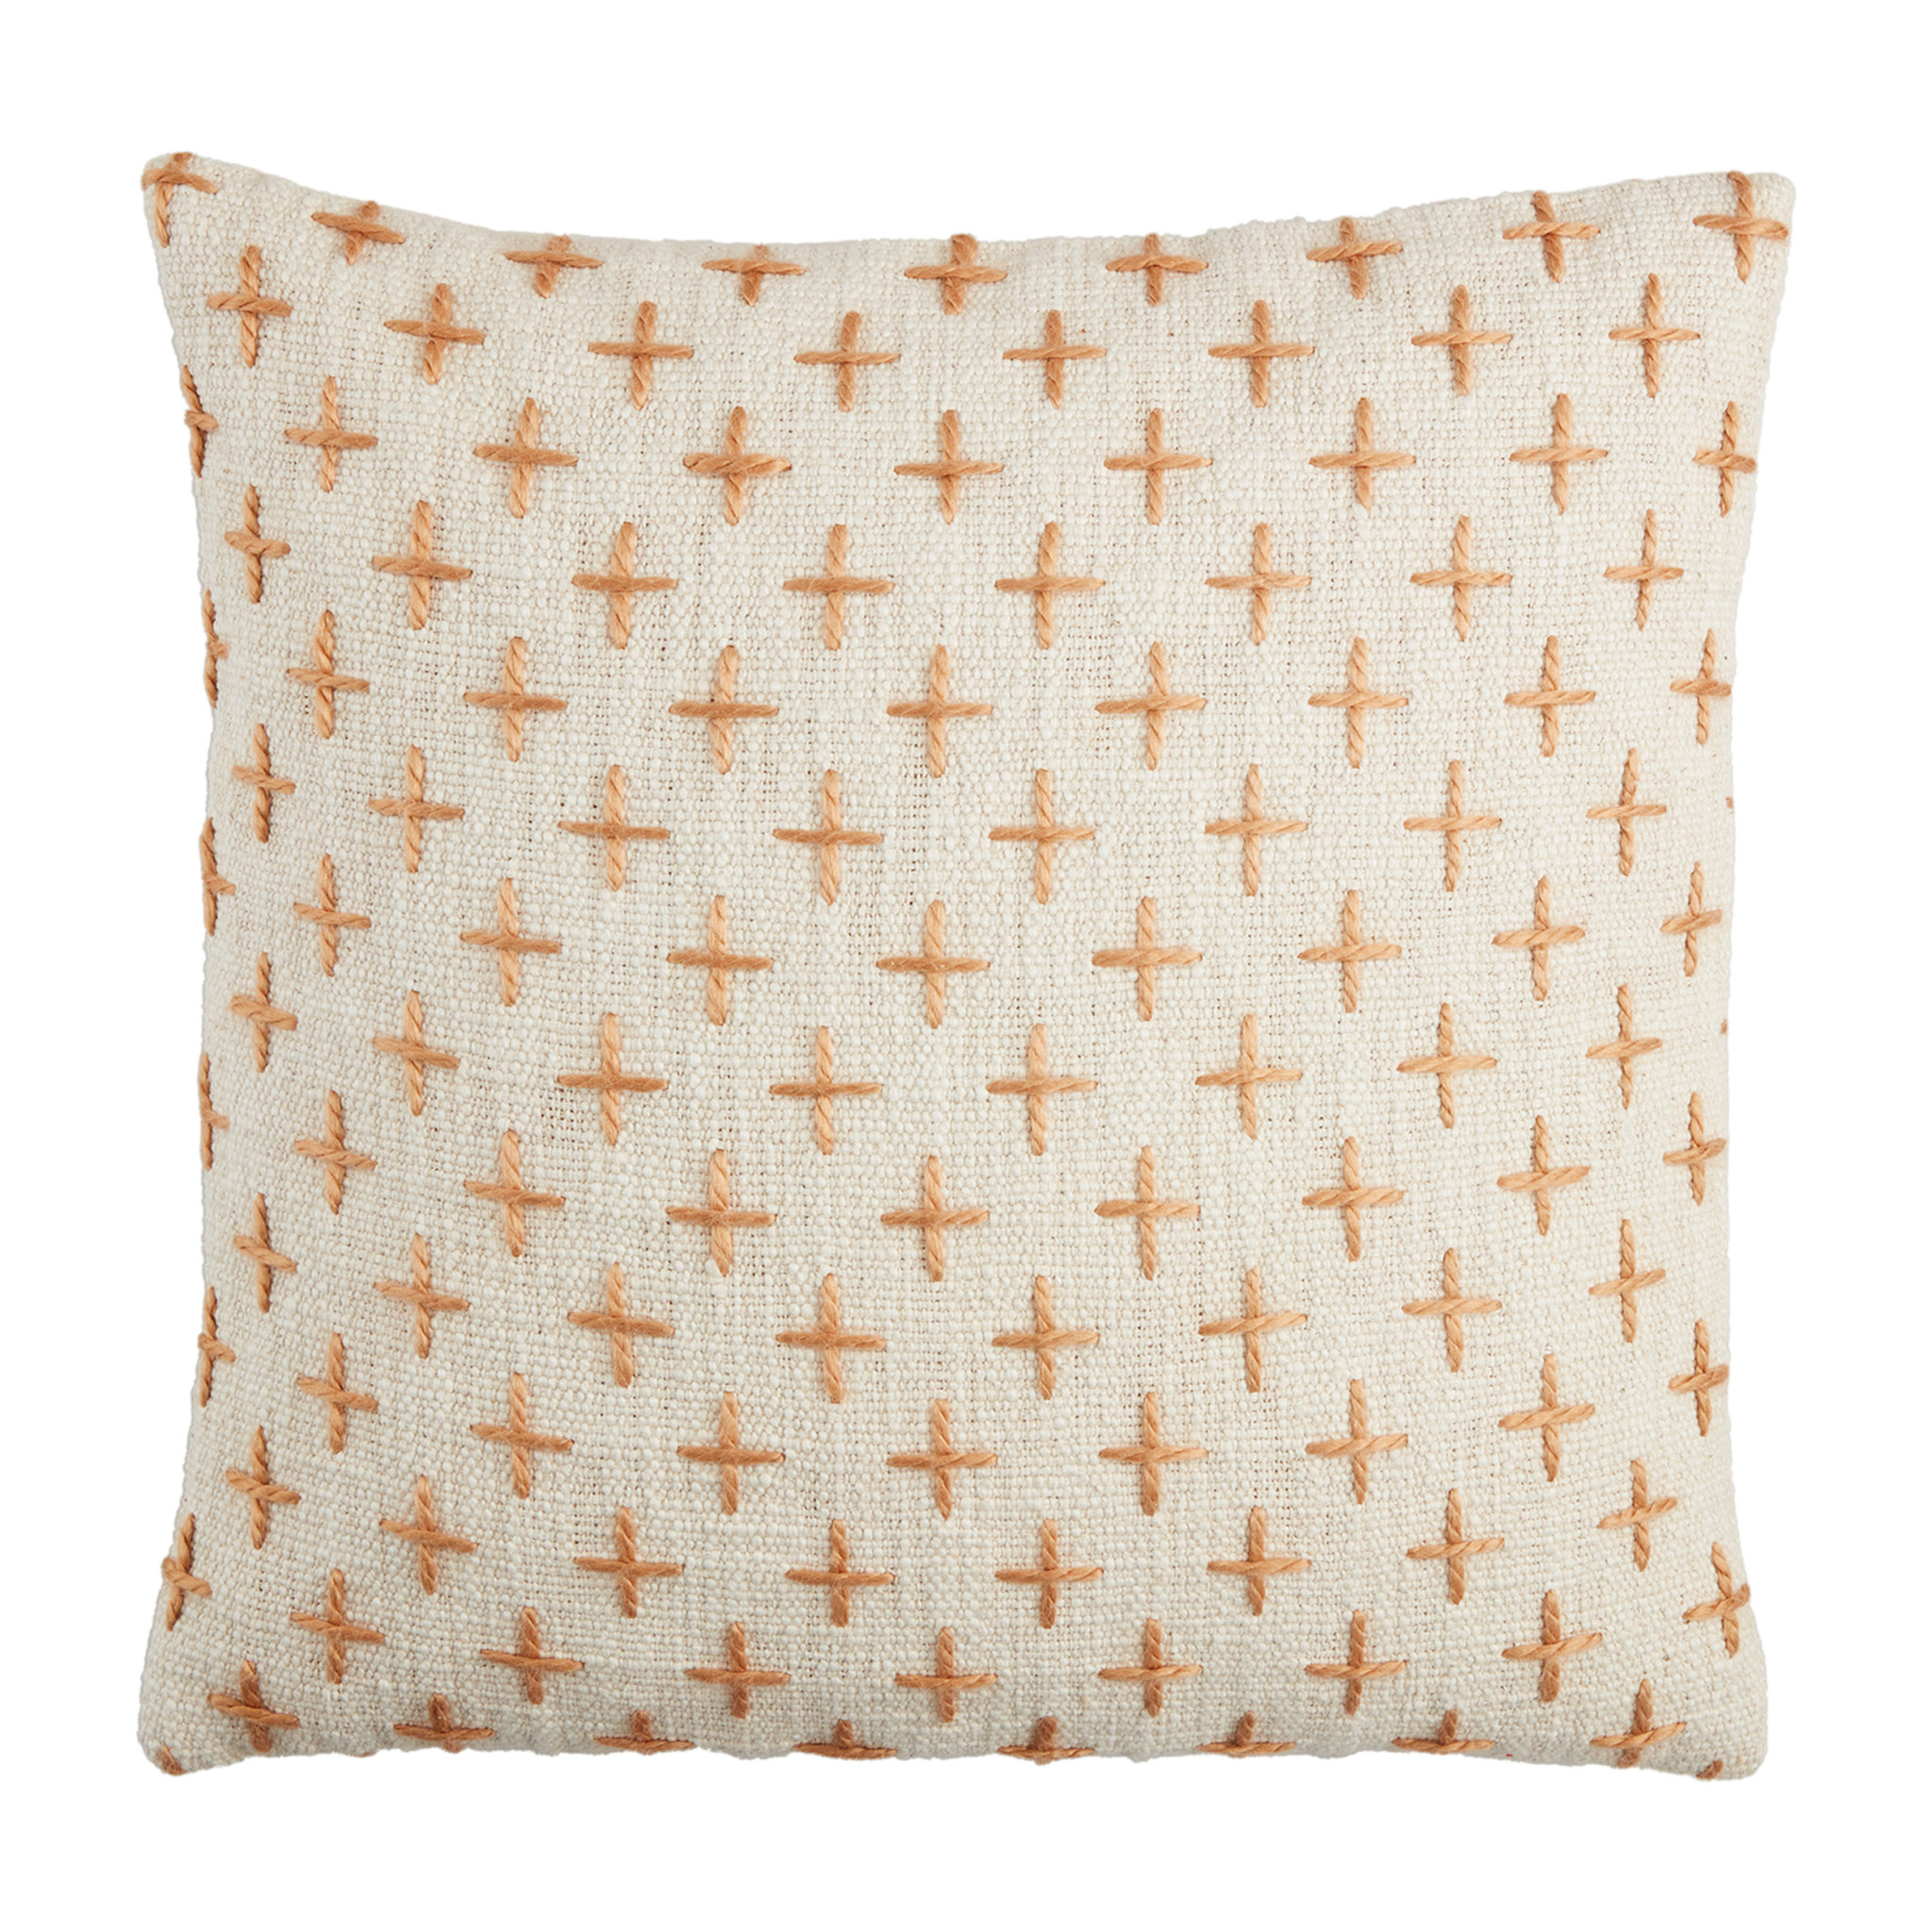 Mudpie SQUARE EMBROIDERED PILLOW